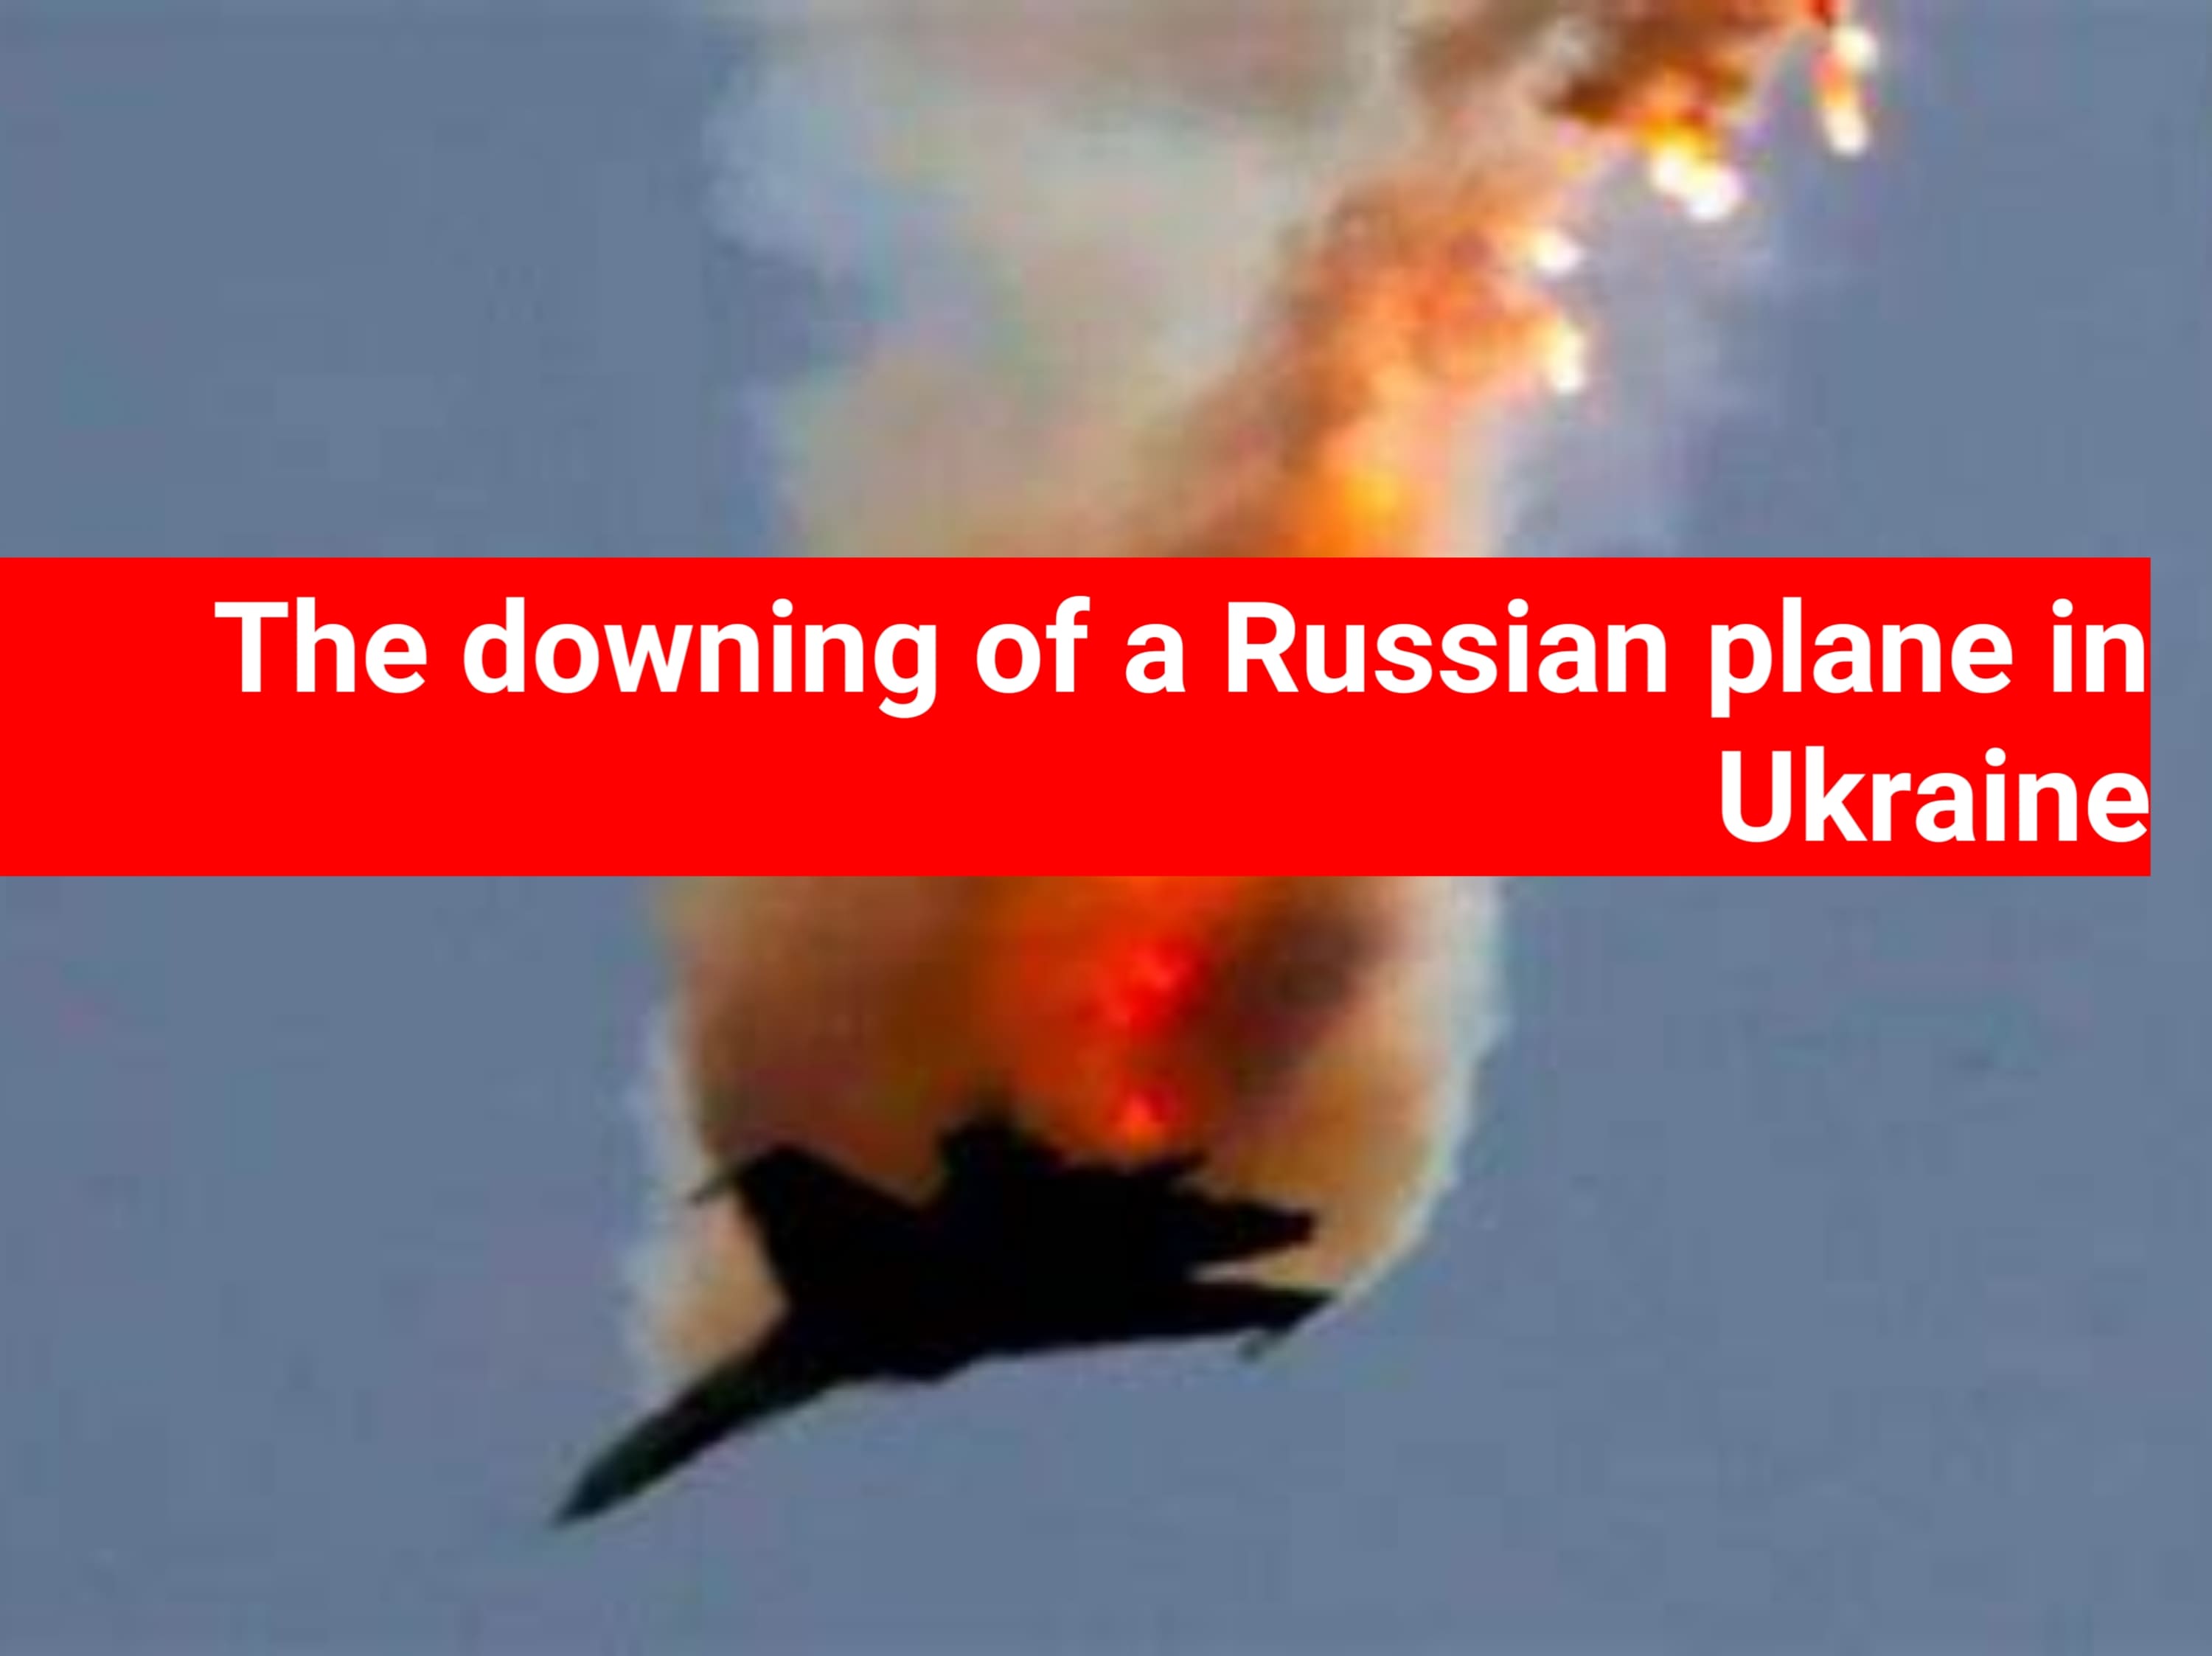 The downing of a Russian plane in Ukraine